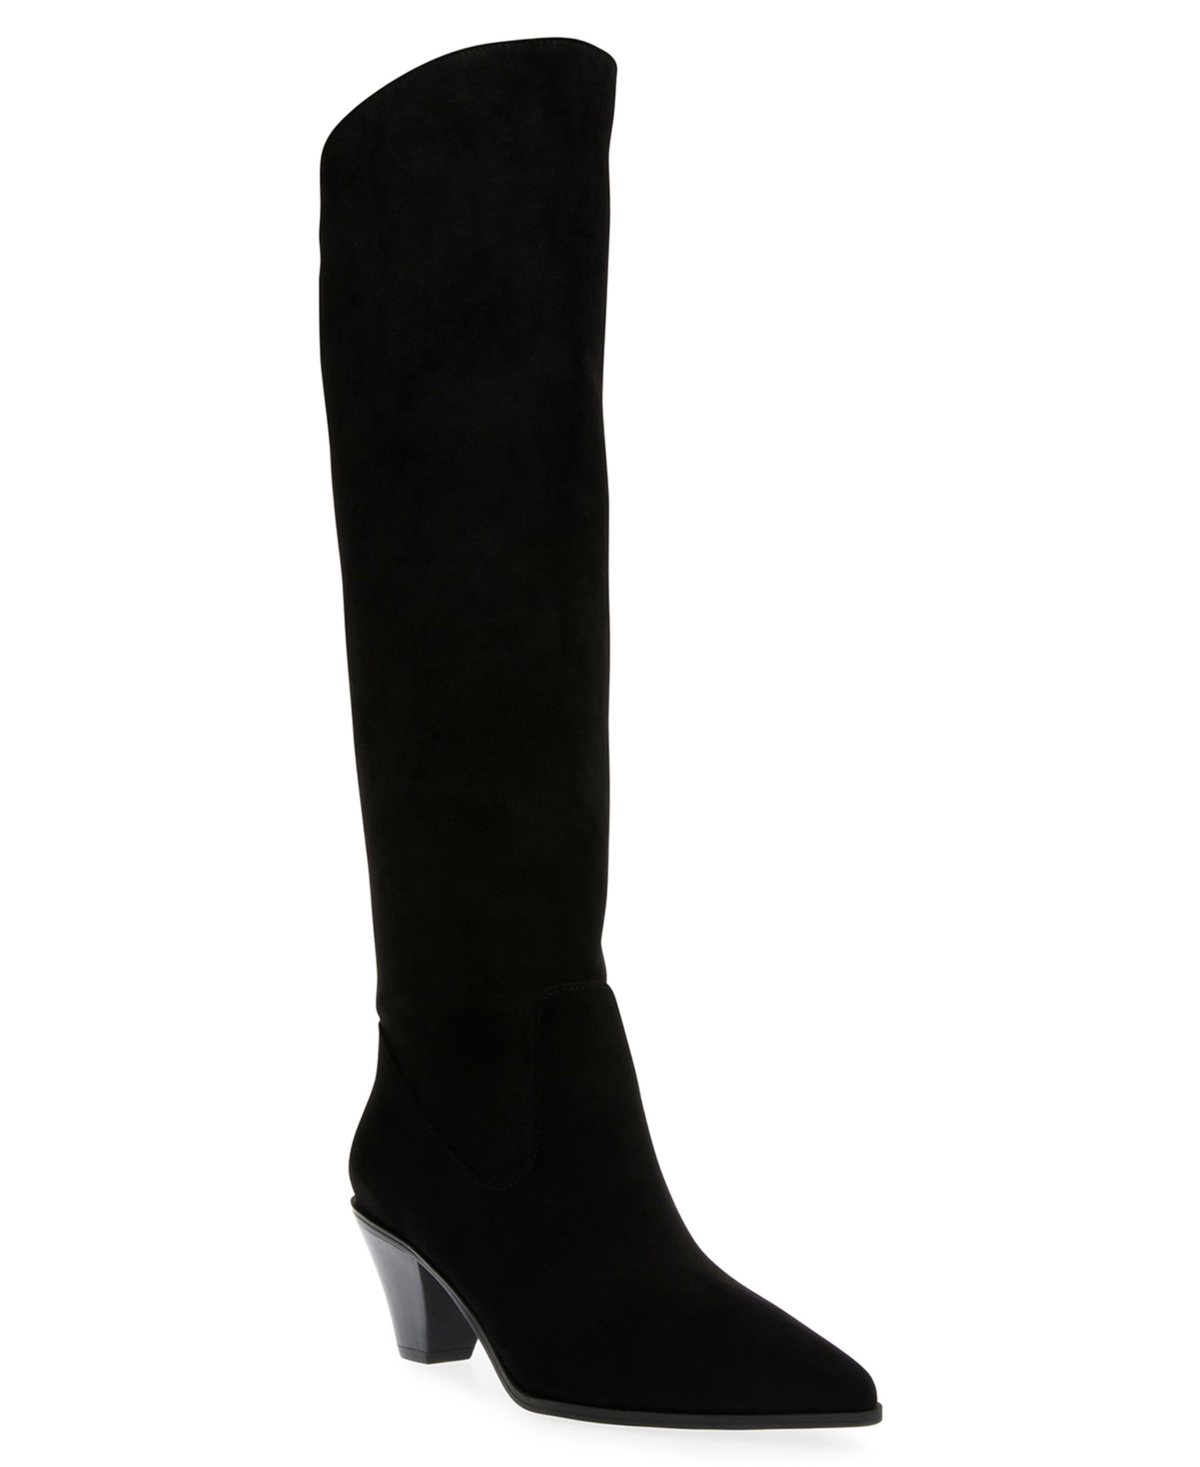 Women's Ware Pointed Toe Knee High Boots - Dark Natural Microsuede